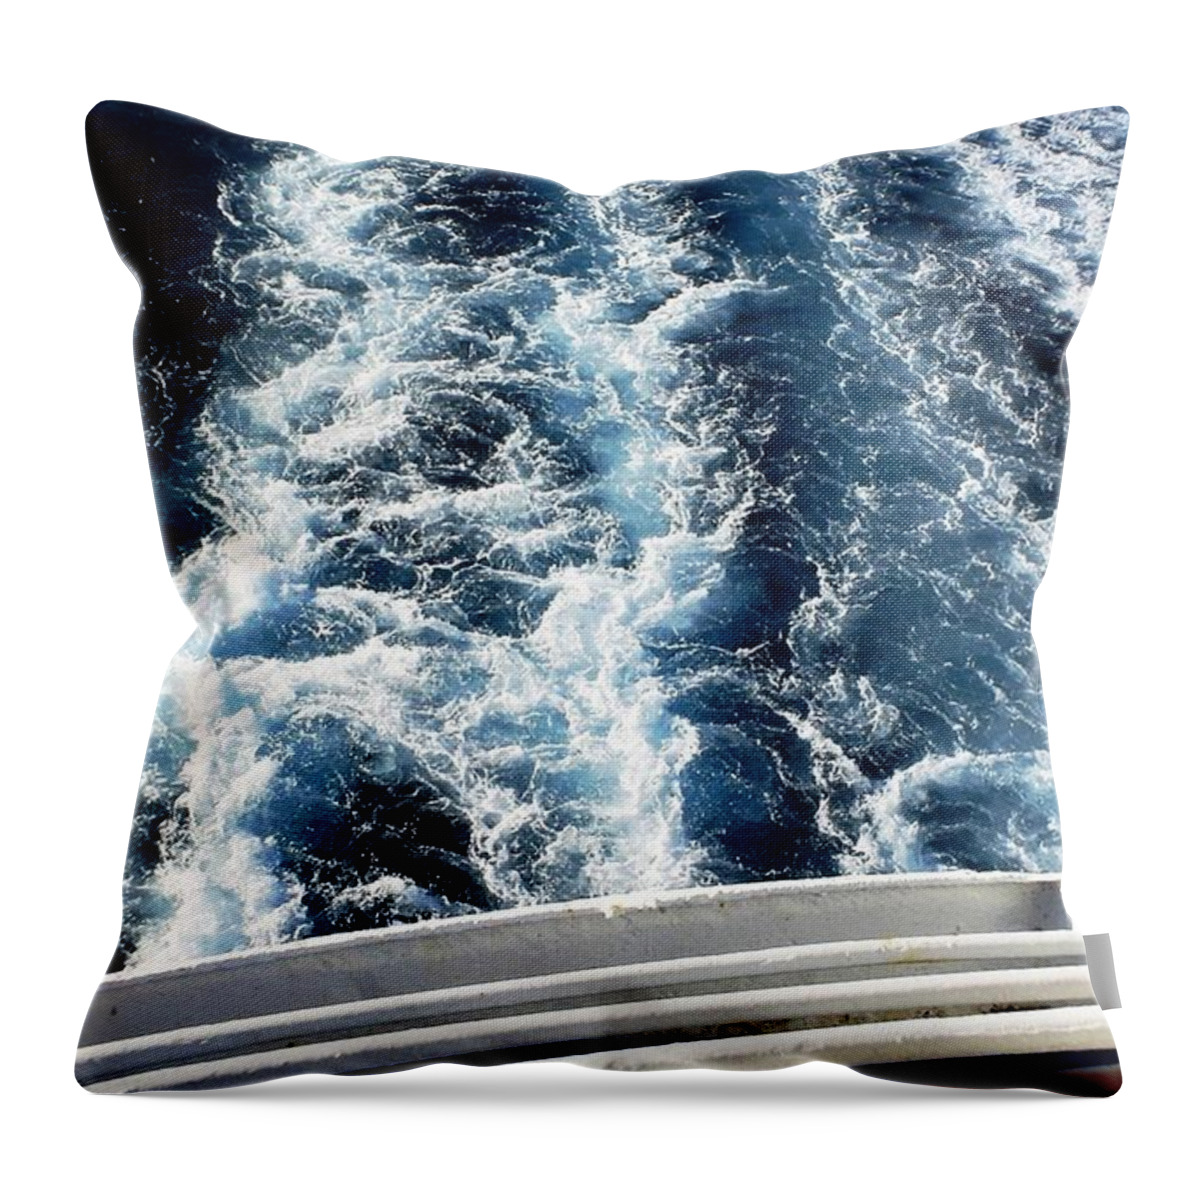 Speed Throw Pillow featuring the photograph Aft by Piety Dsilva